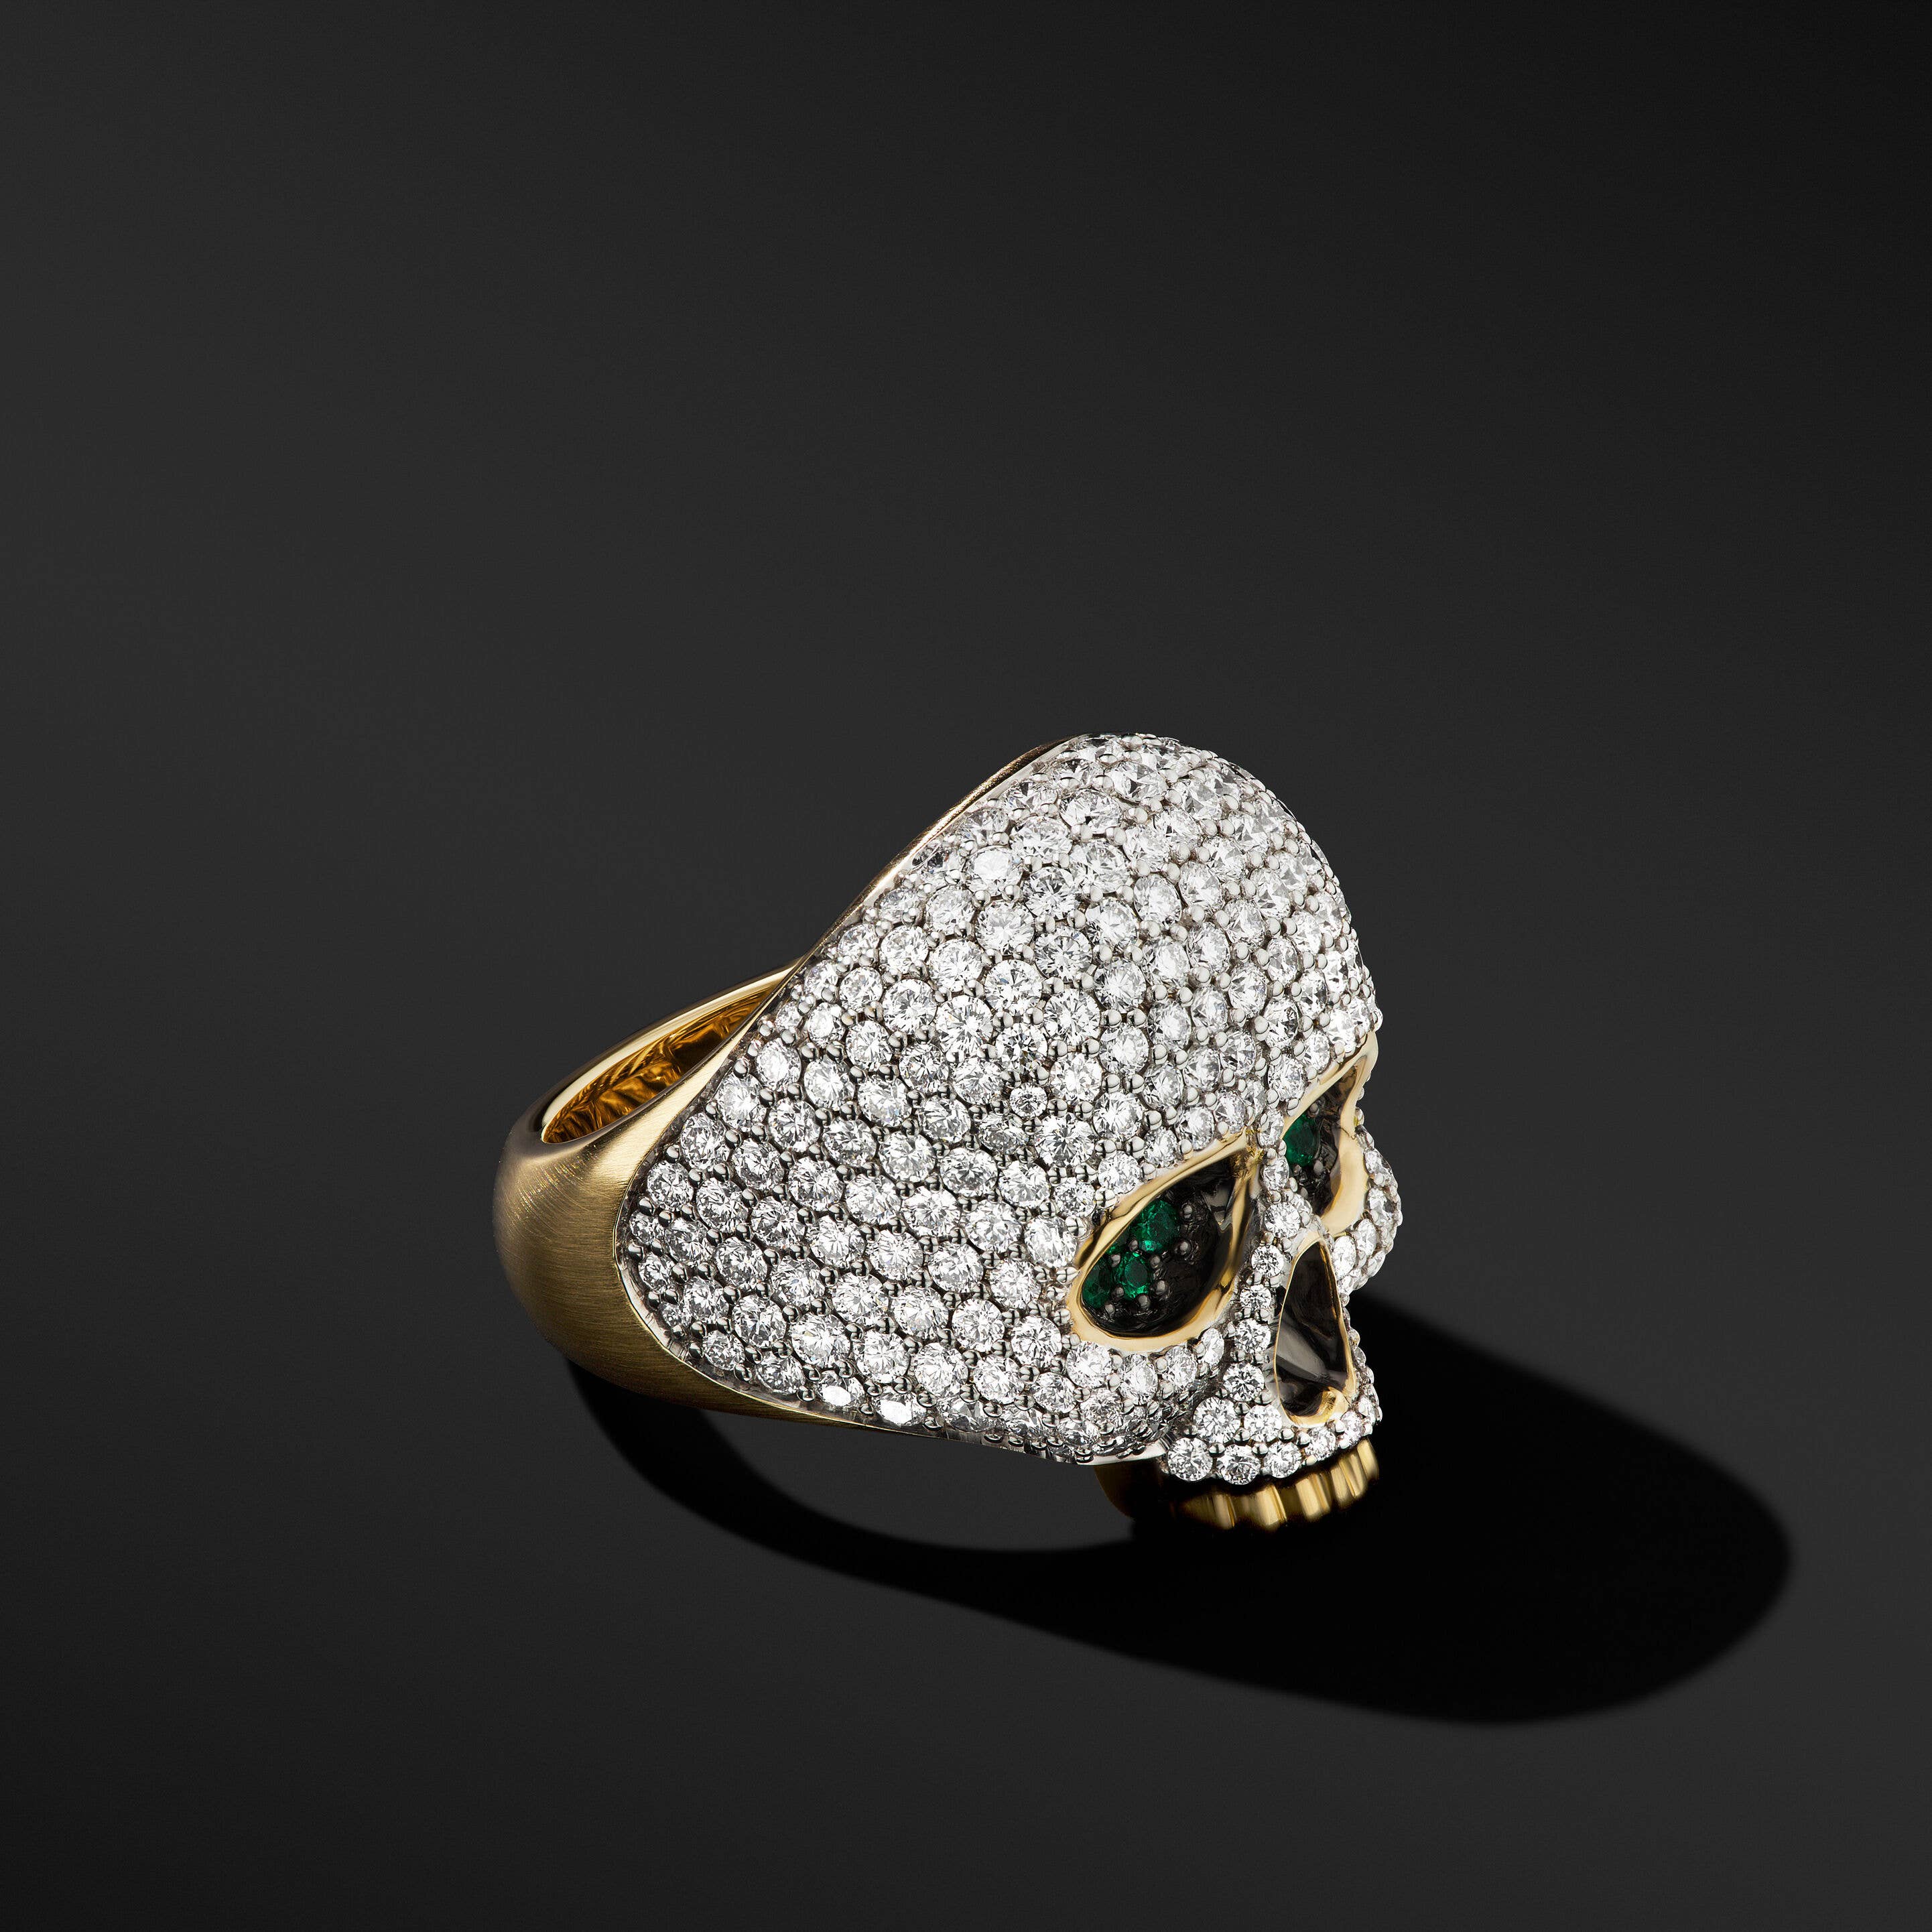 Memento Mori Skull Ring in 18K Yellow Gold with Pavé Diamonds and Emeralds